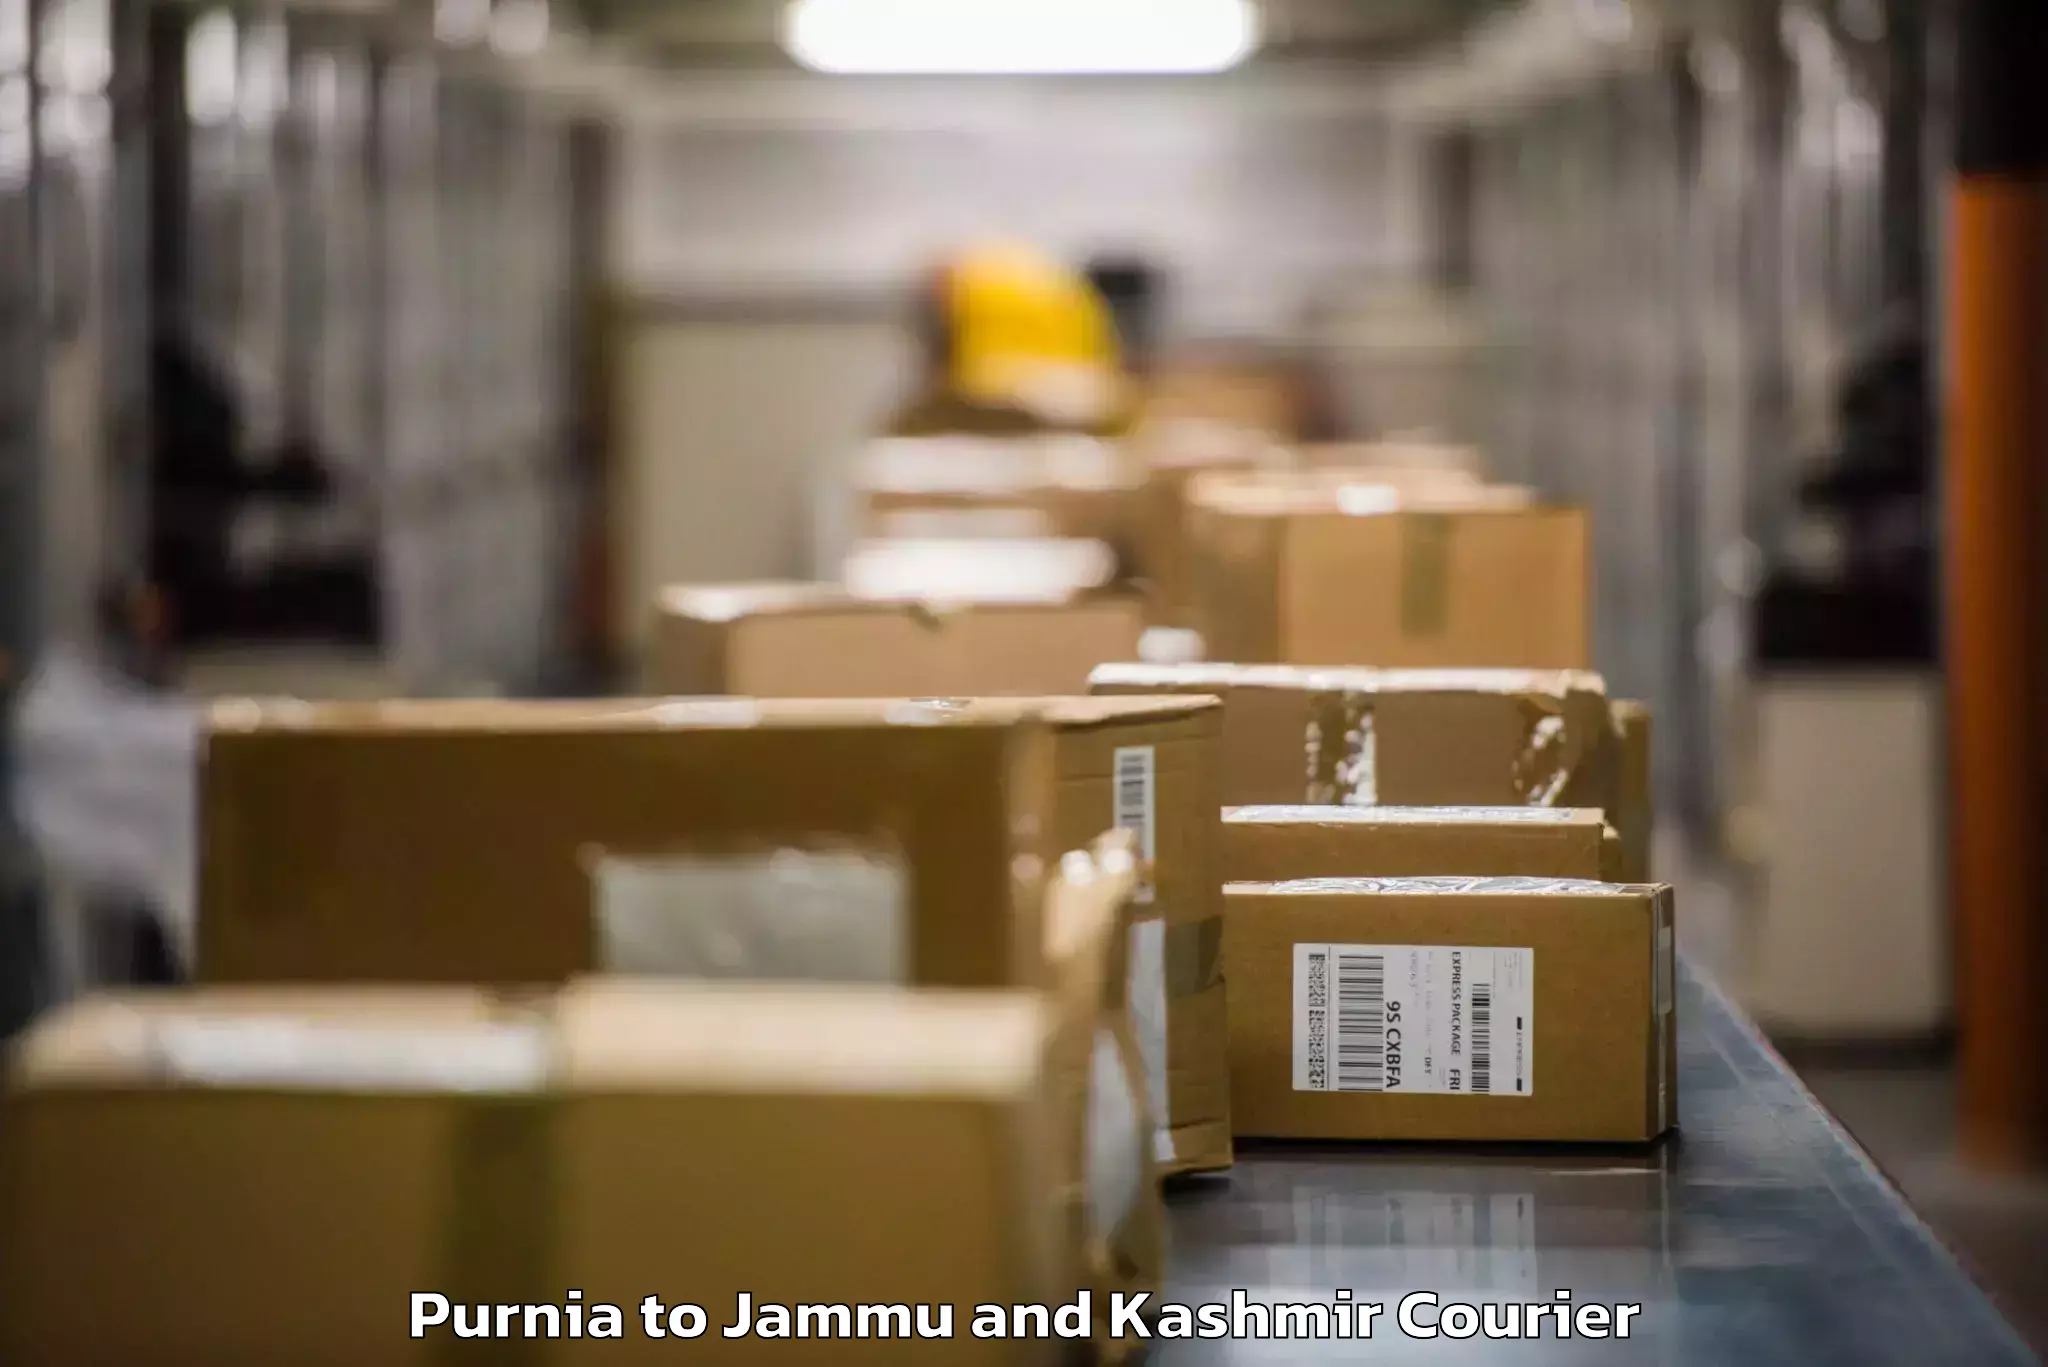 Baggage transport professionals Purnia to Jammu and Kashmir